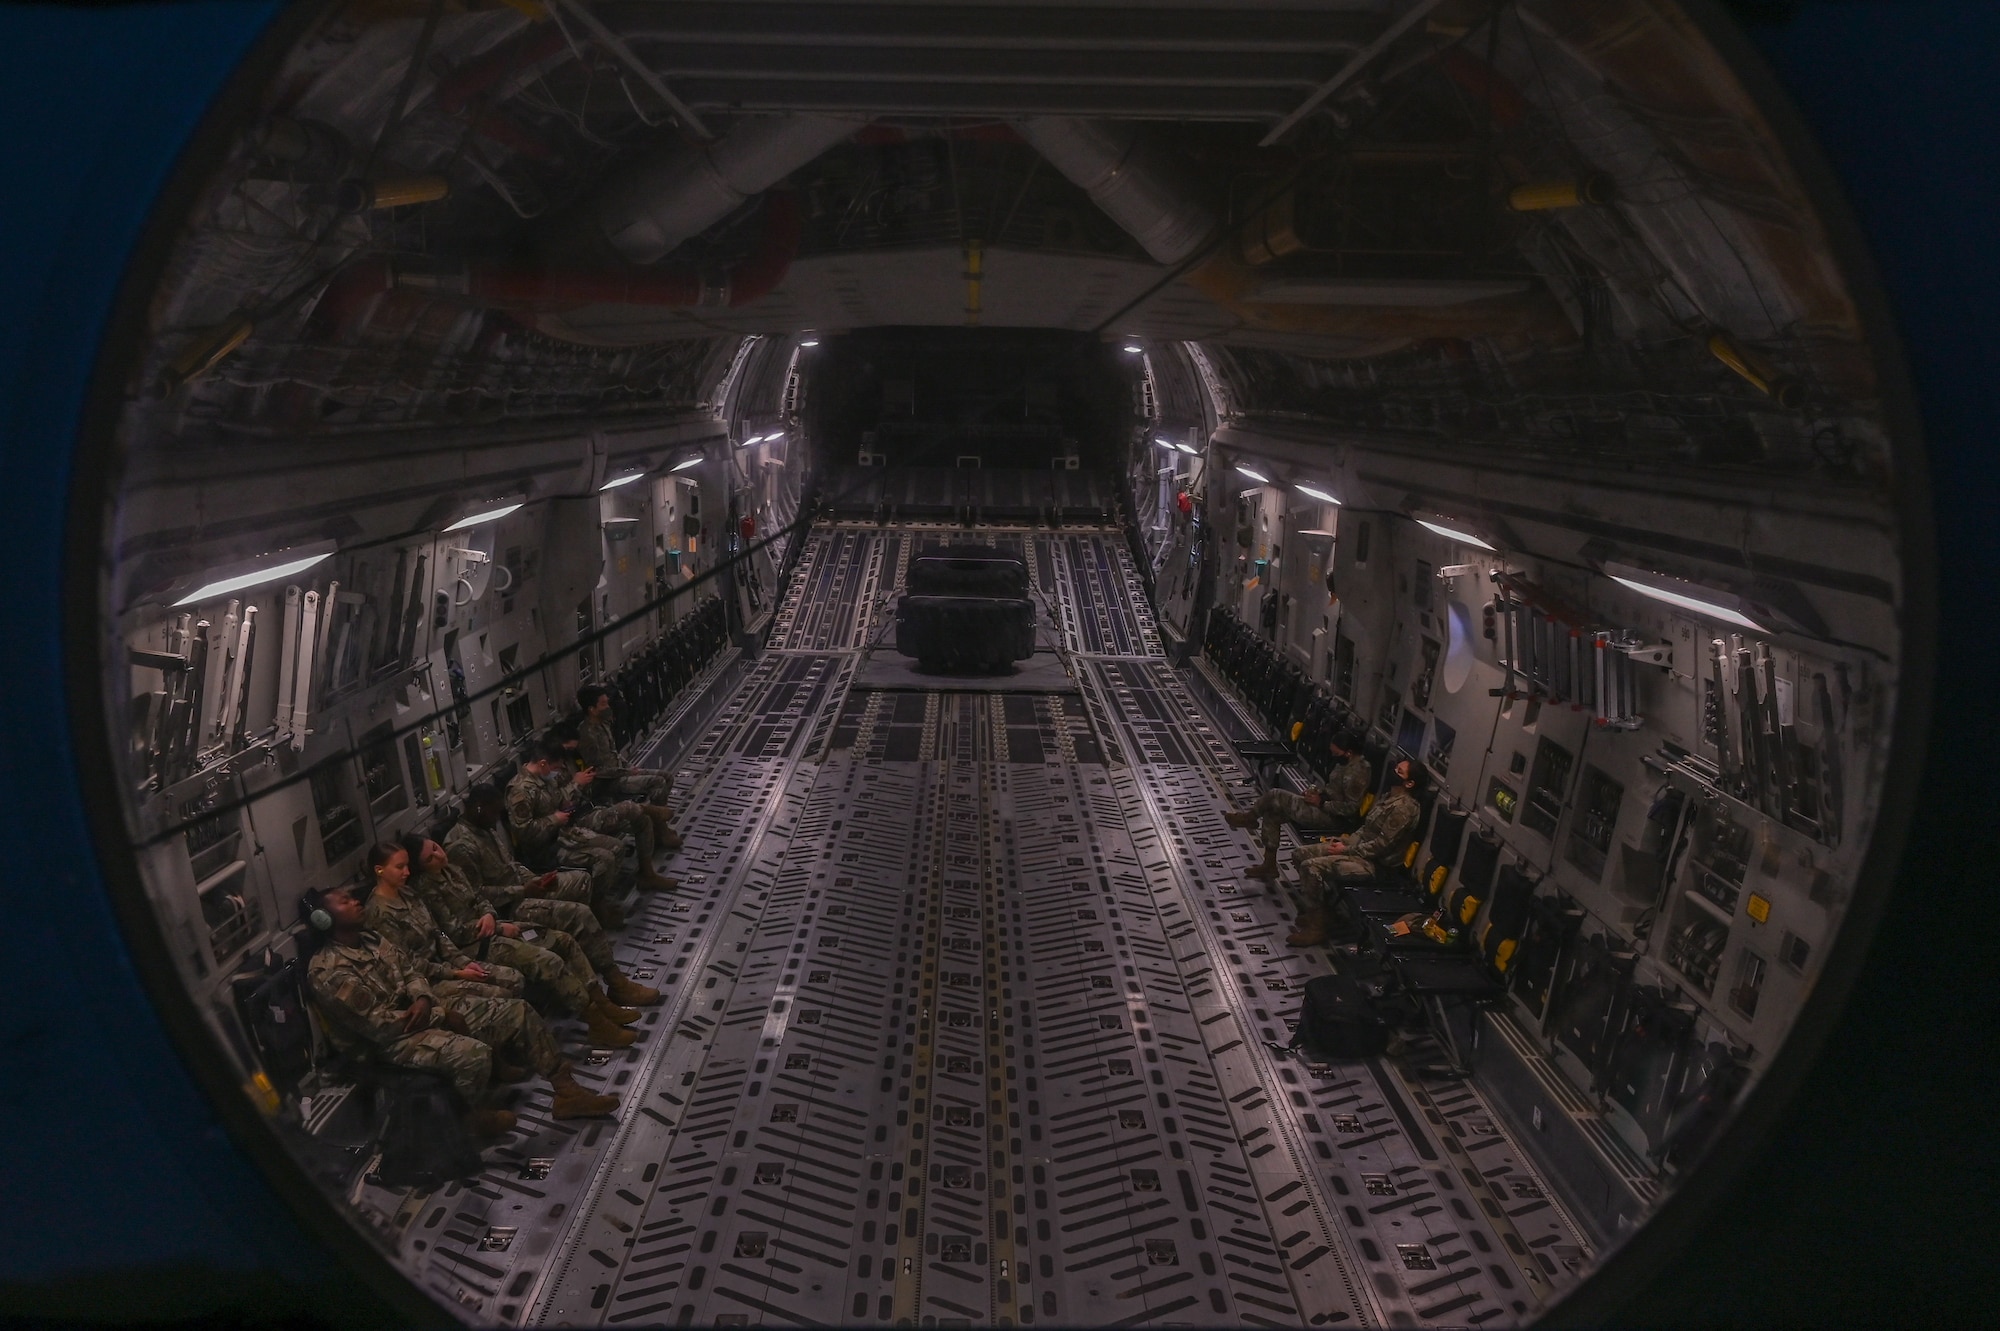 Team McChord Airmen await takeoff in a C-17 Globemaster III at Joint Base Lewis-McChord, Washington, June 2, 2021. These Airmen participated in an orientation flight as part of the Airmen Experience, a two-day immersive program that connects Airmen to the mission, allowing them to see firsthand how their role contributes to the bigger picture at JBLM. (U.S. Air Force photo by Airman 1st Class Callie Norton)